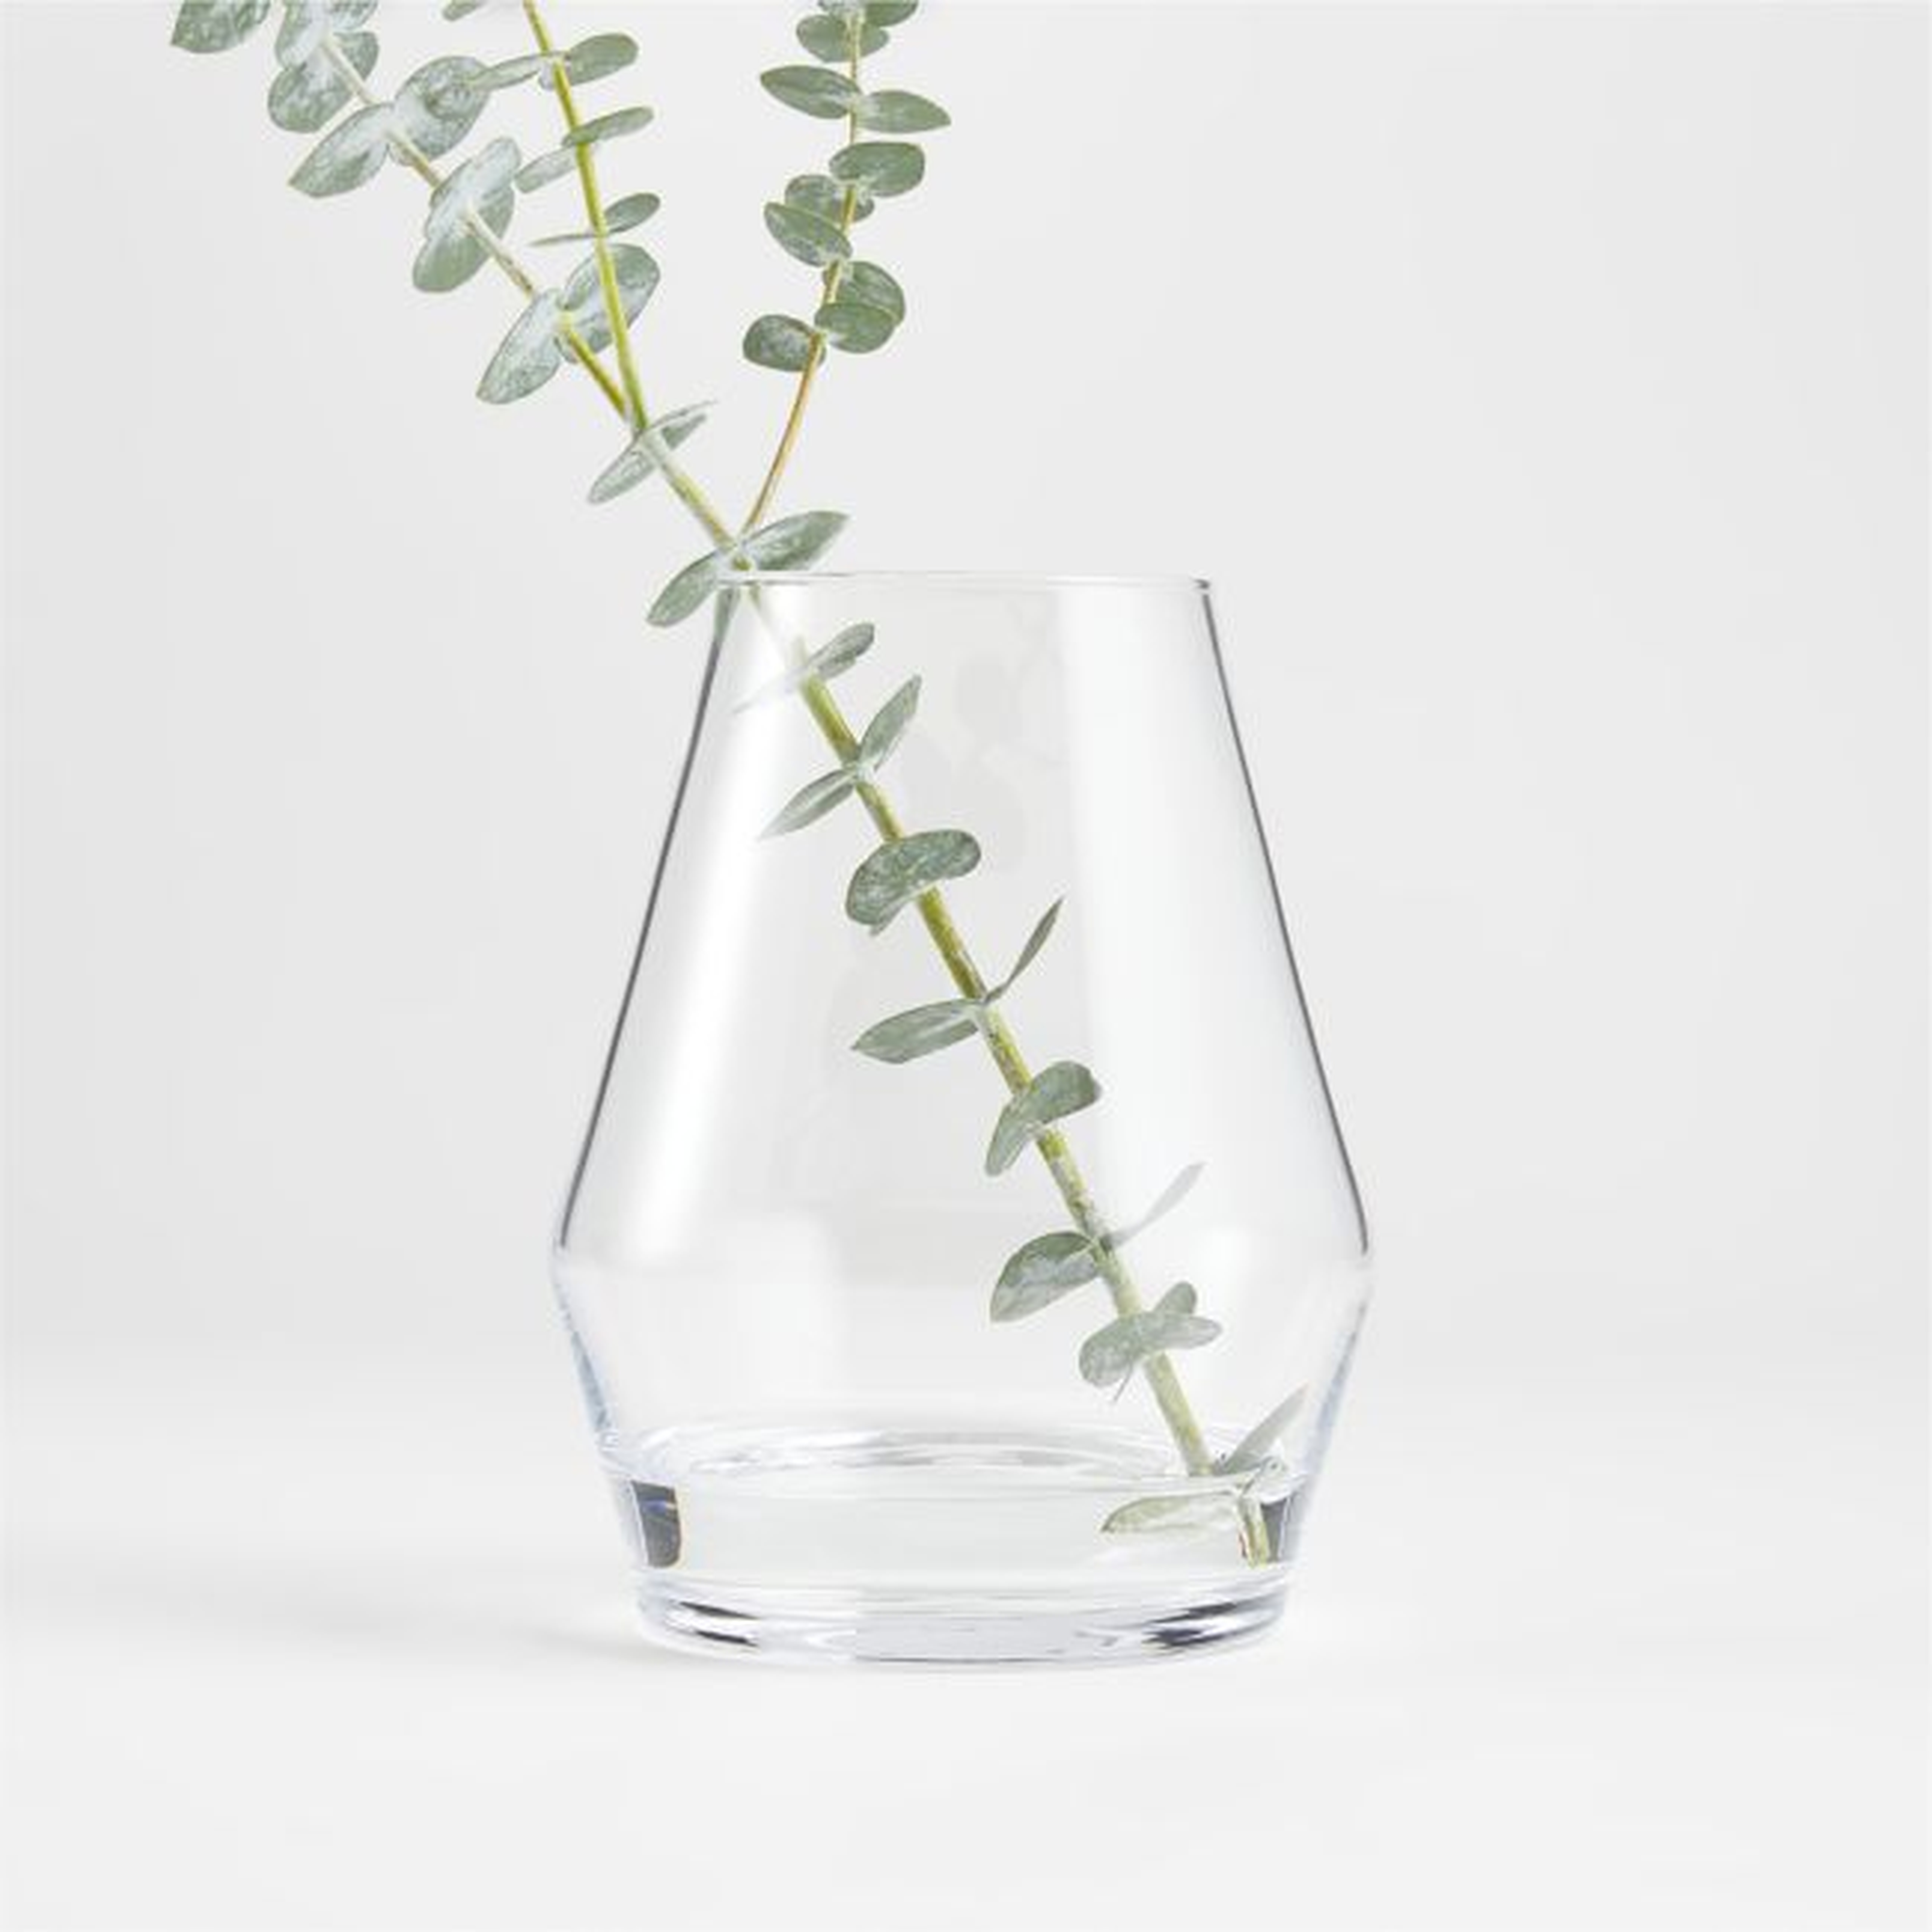 Laurel Angled Clear Glass Vase 6.25" - Crate and Barrel